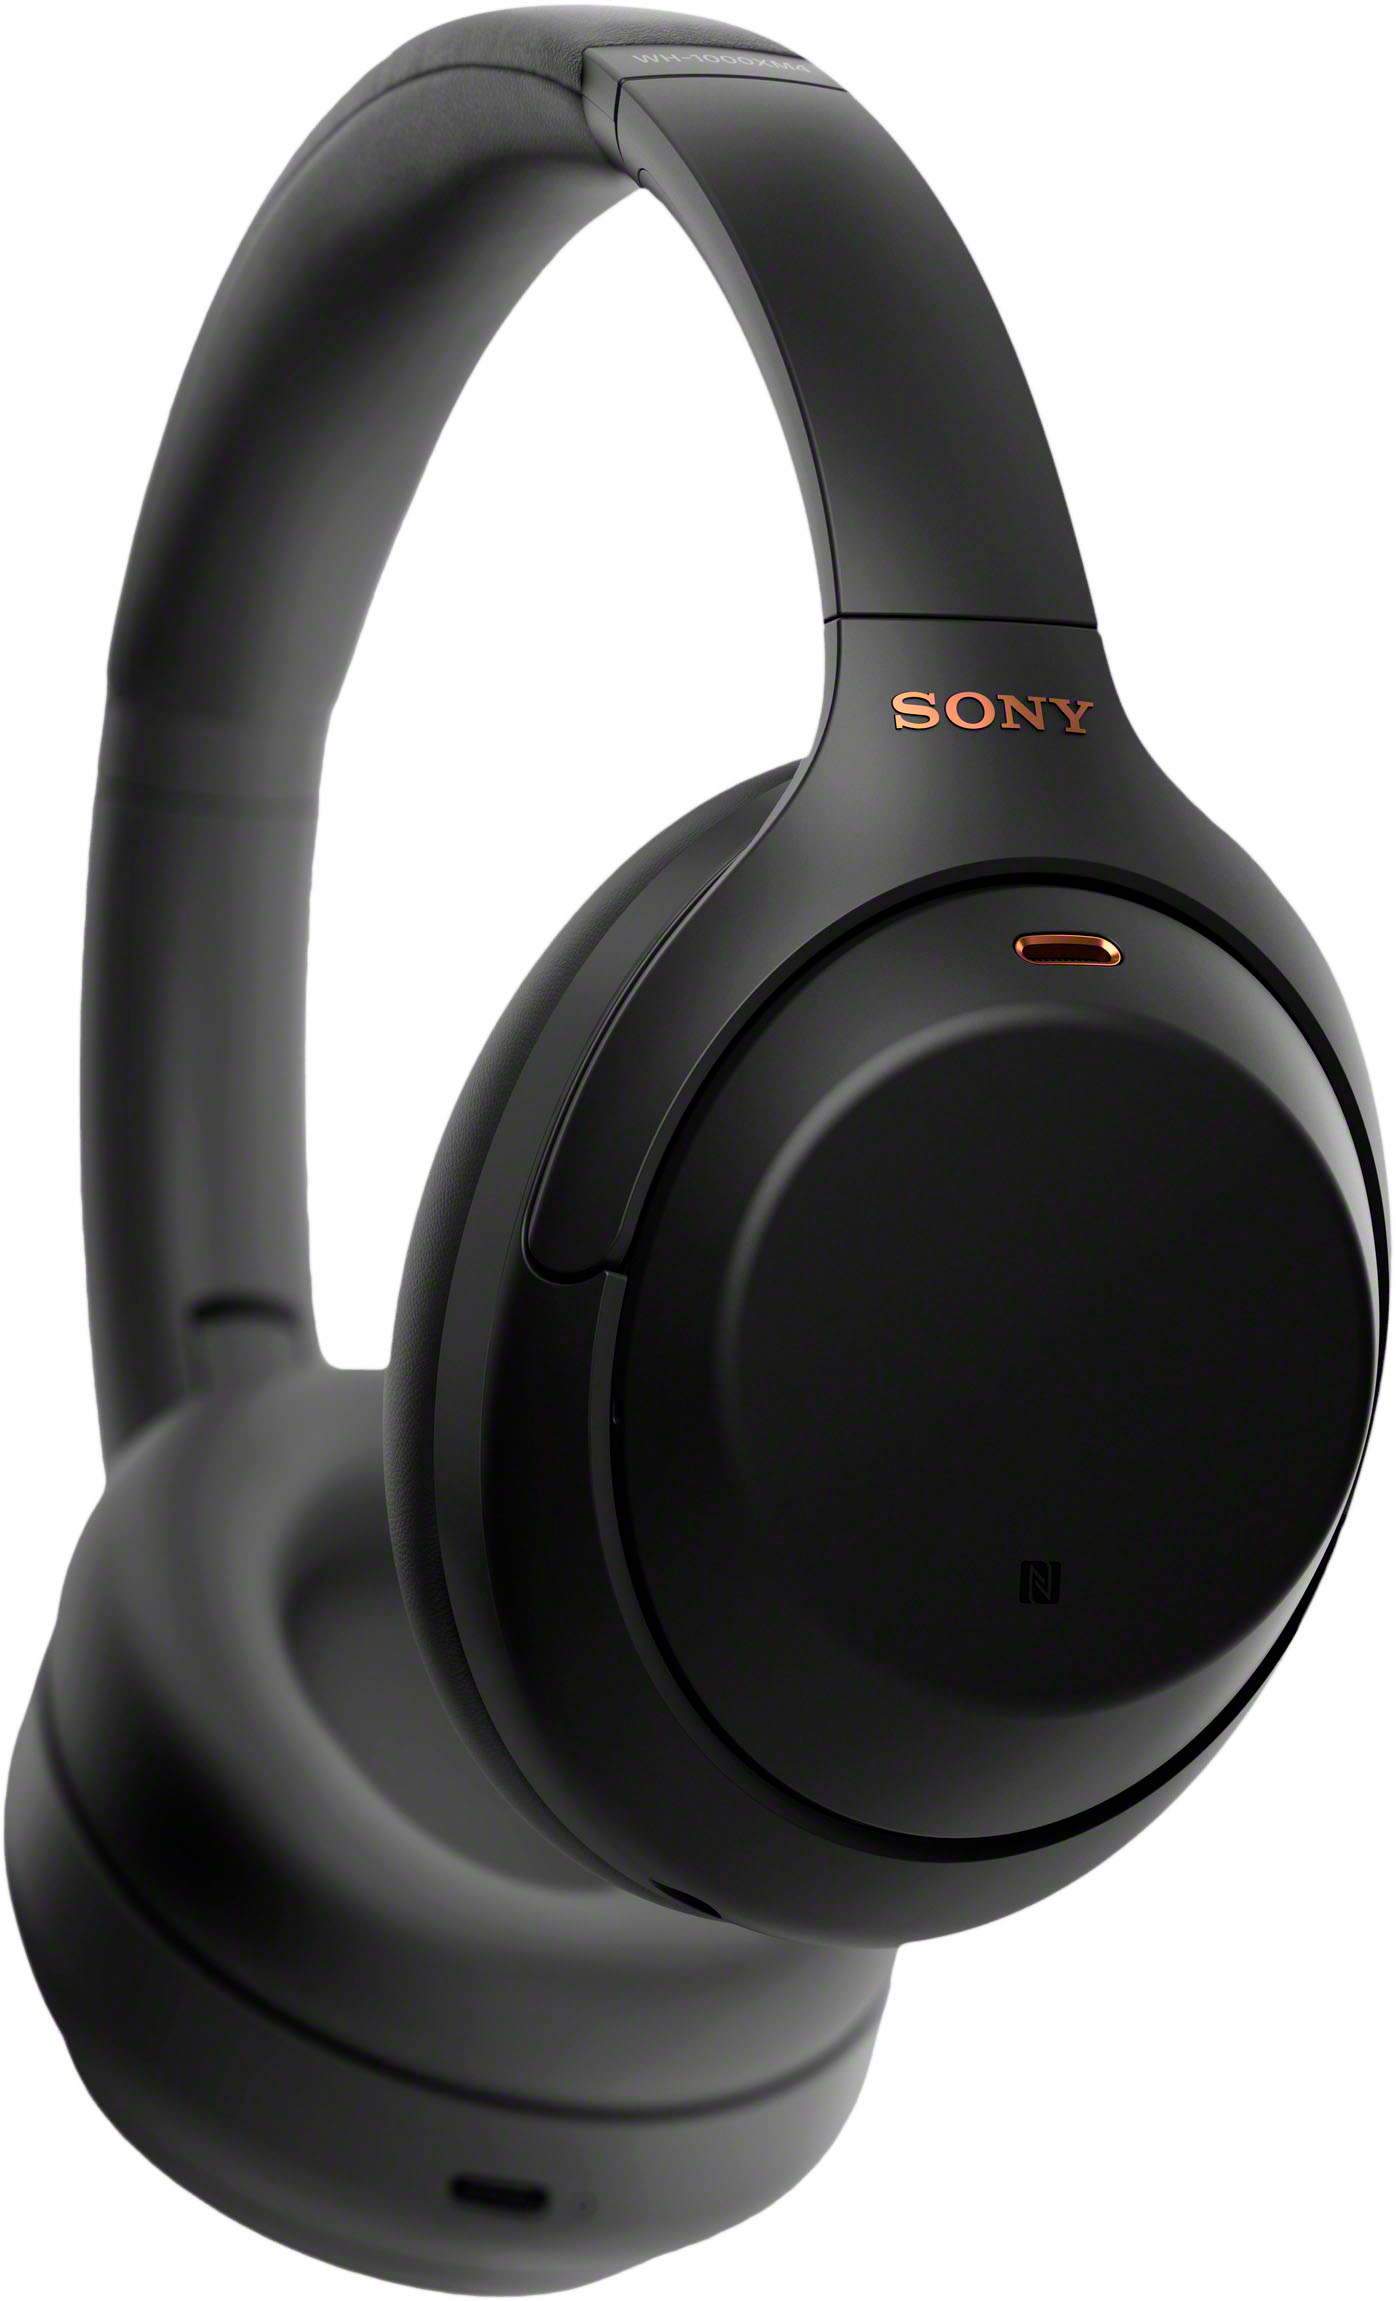 Sony WH-1000XM4 Wireless Noise-Cancelling Over-the-Ear Headphones - Black (Refurbished)